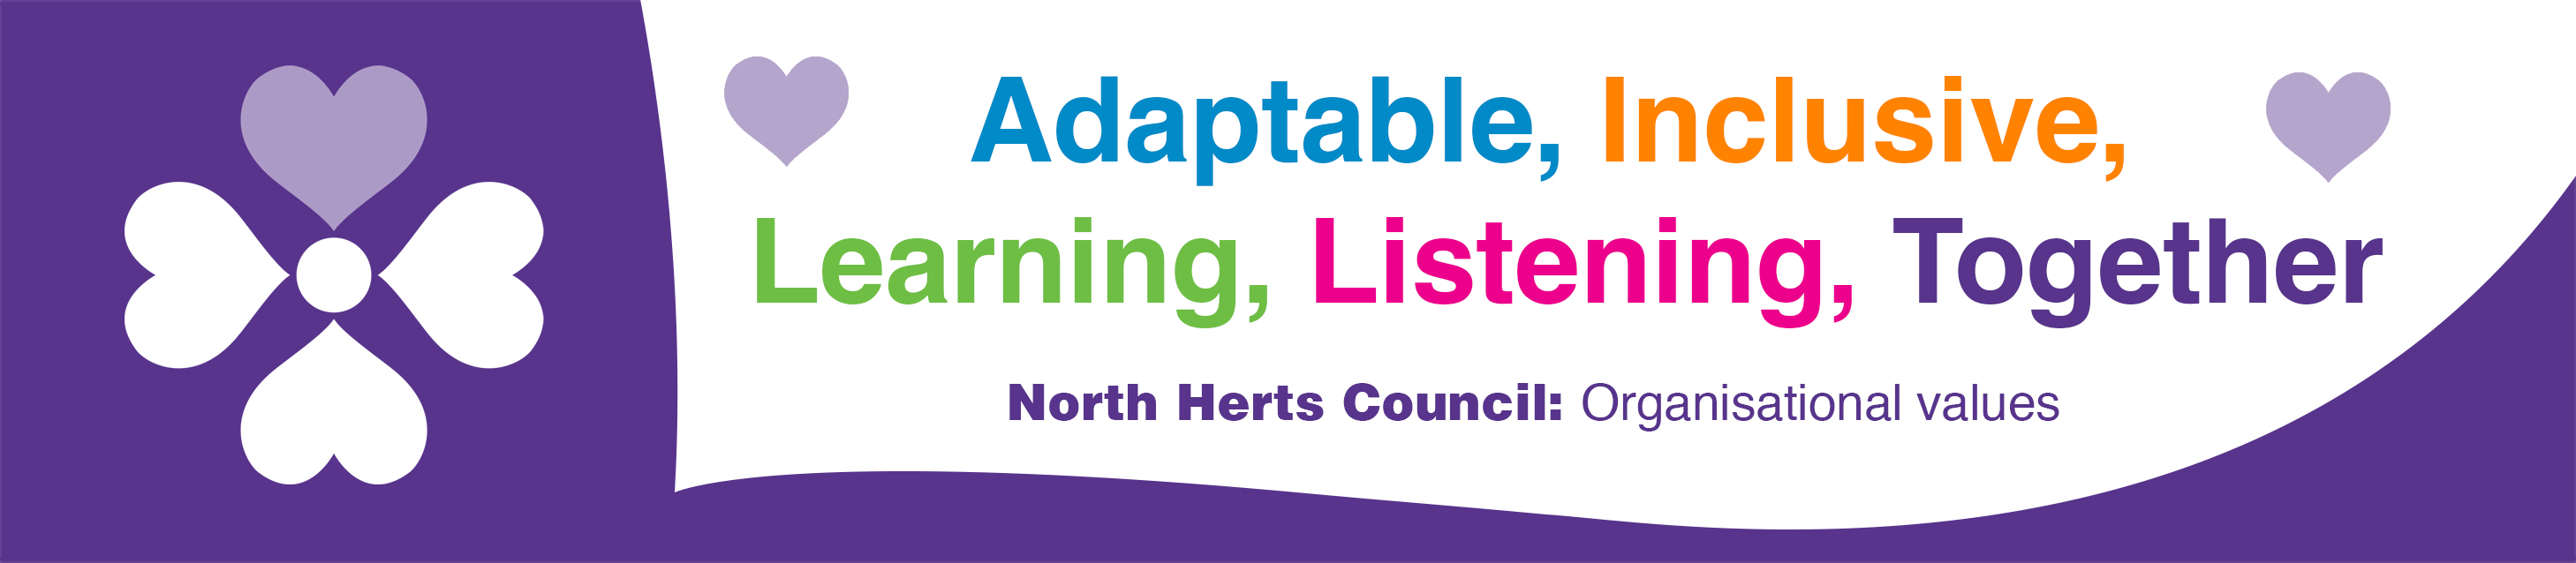 Adaptable, Inclusive, Learning, Listening, Together - North Herts Council organisational values